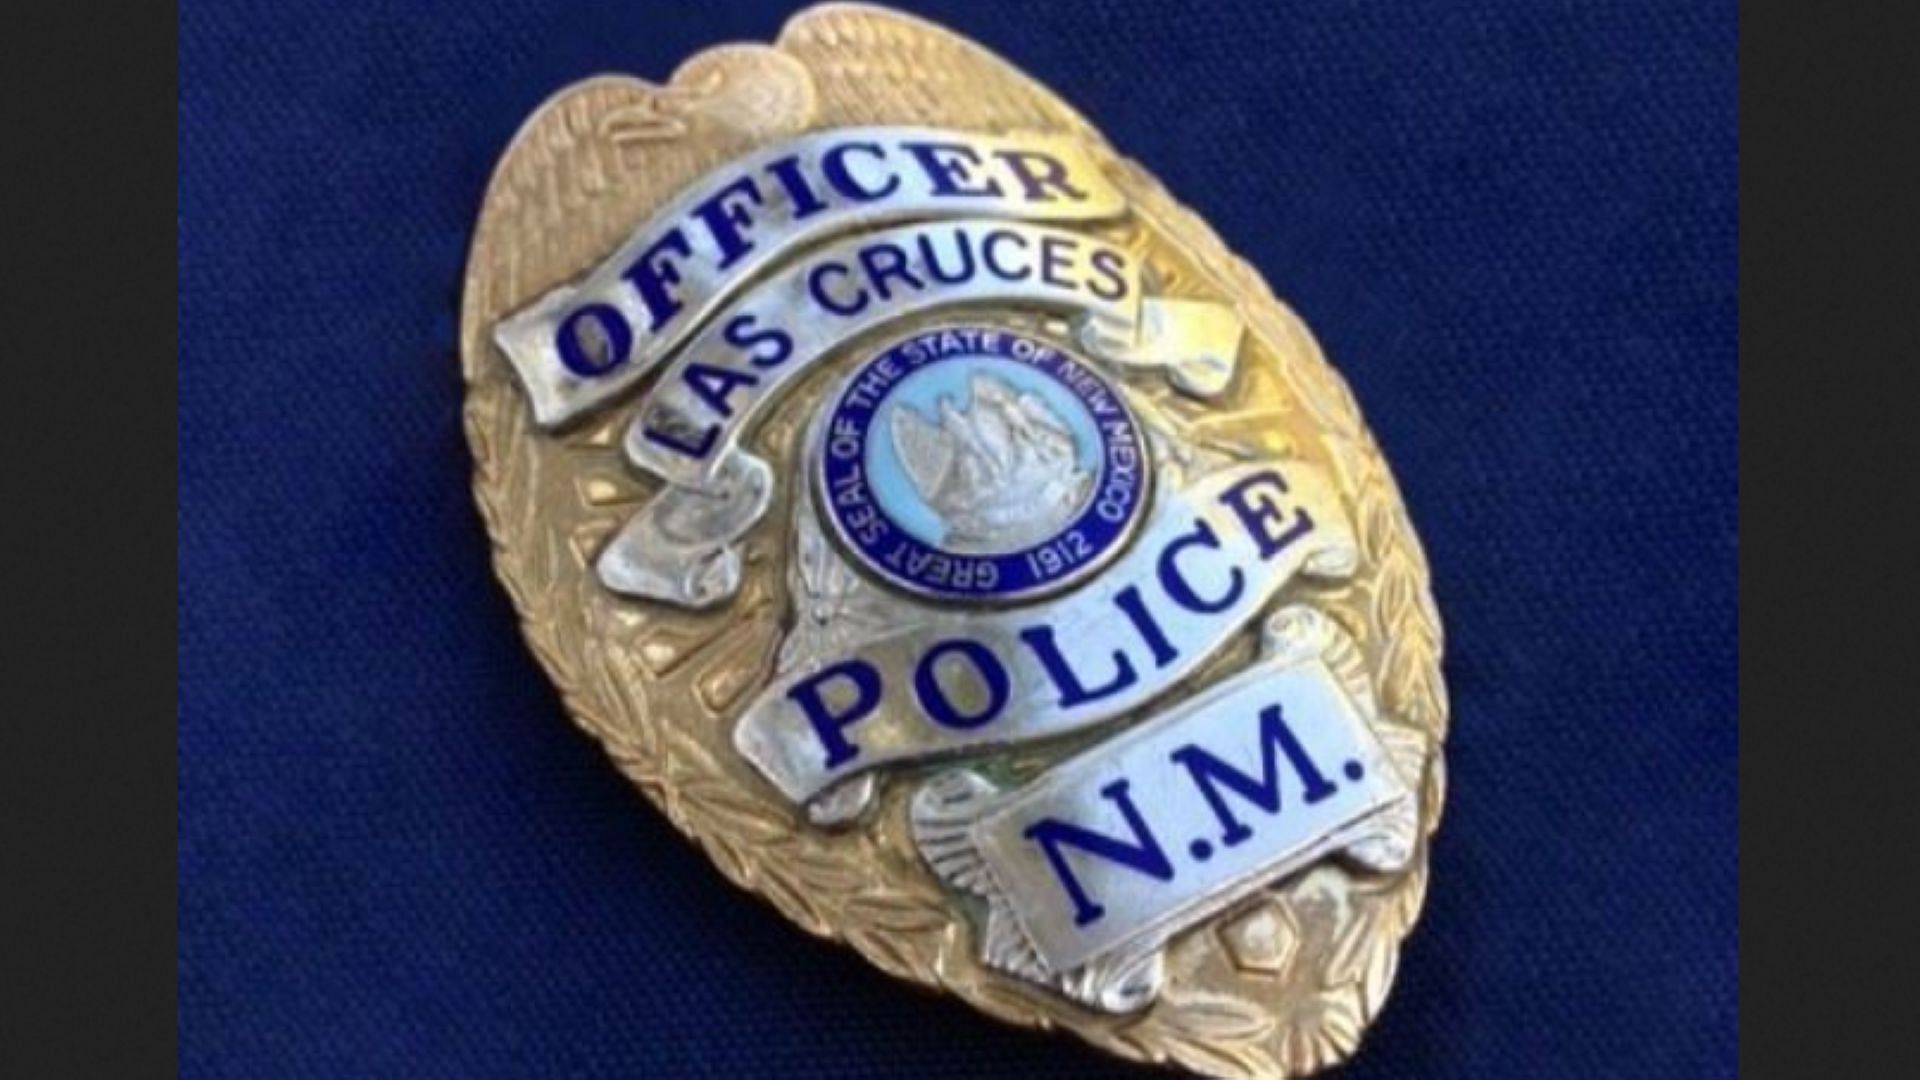 Tributes pour in as New Mexico officer killed in line of duty. (Image via Las Cruces Police Department)